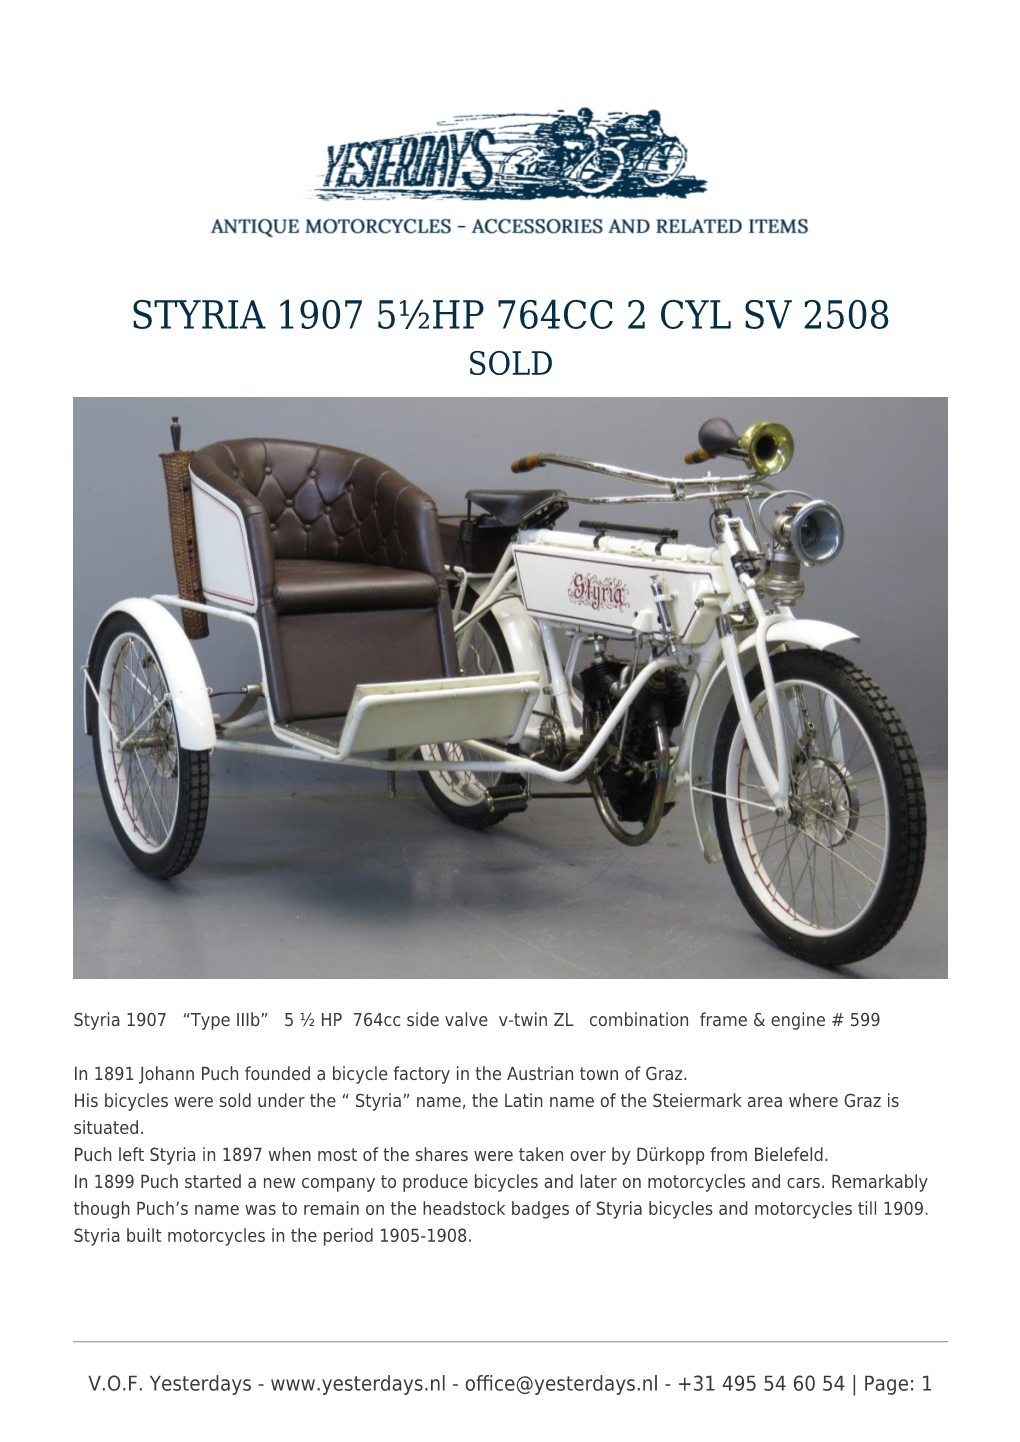 Styria 1907 5½Hp 764Cc 2 Cyl Sv 2508 Sold